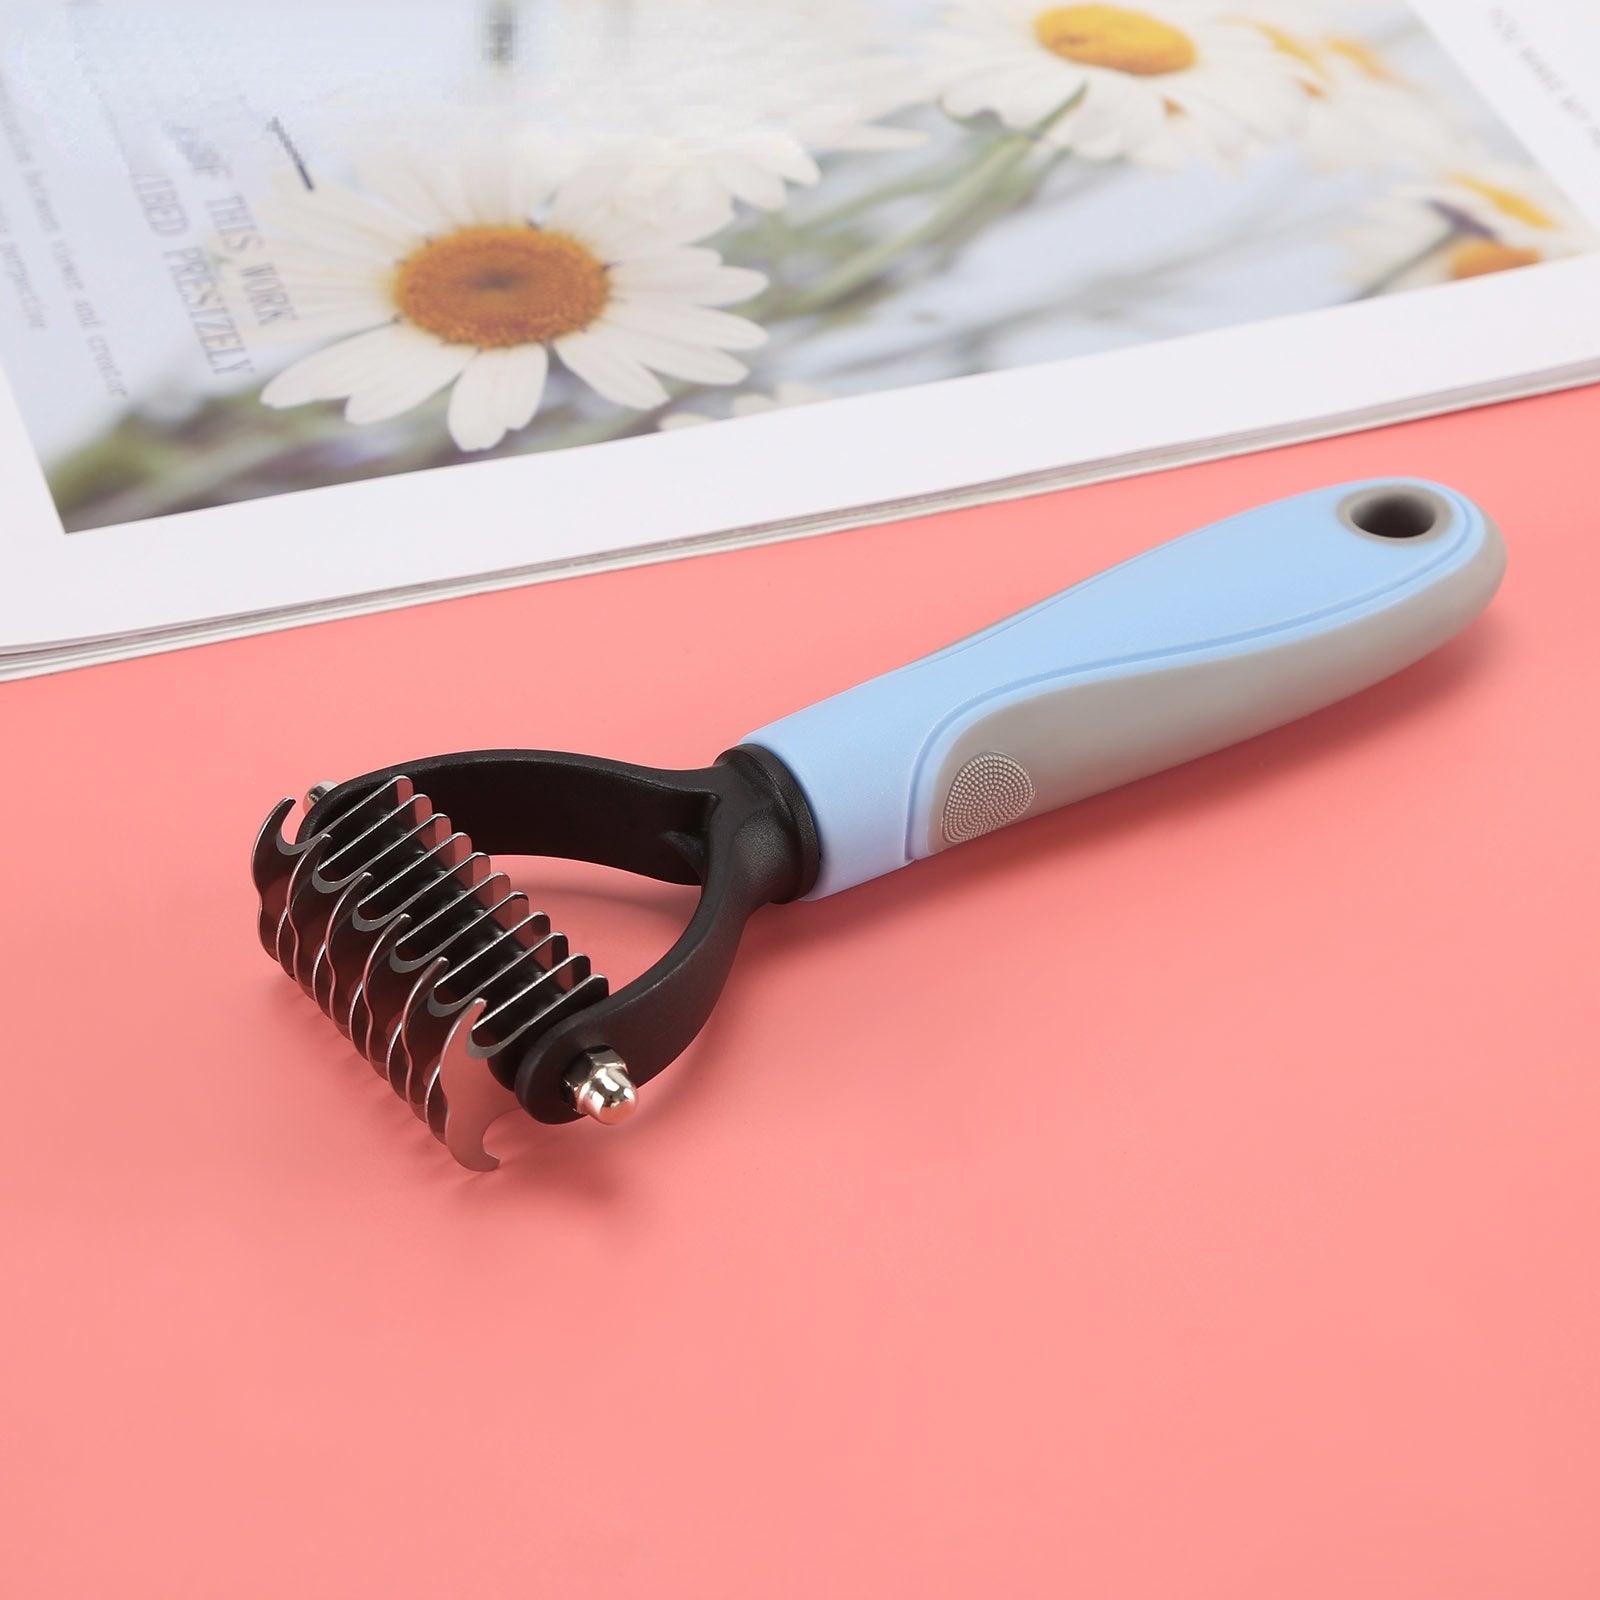 A blue and white Sweetest Paw Dog Comb Pet Hair Removal Comb on a pink background.